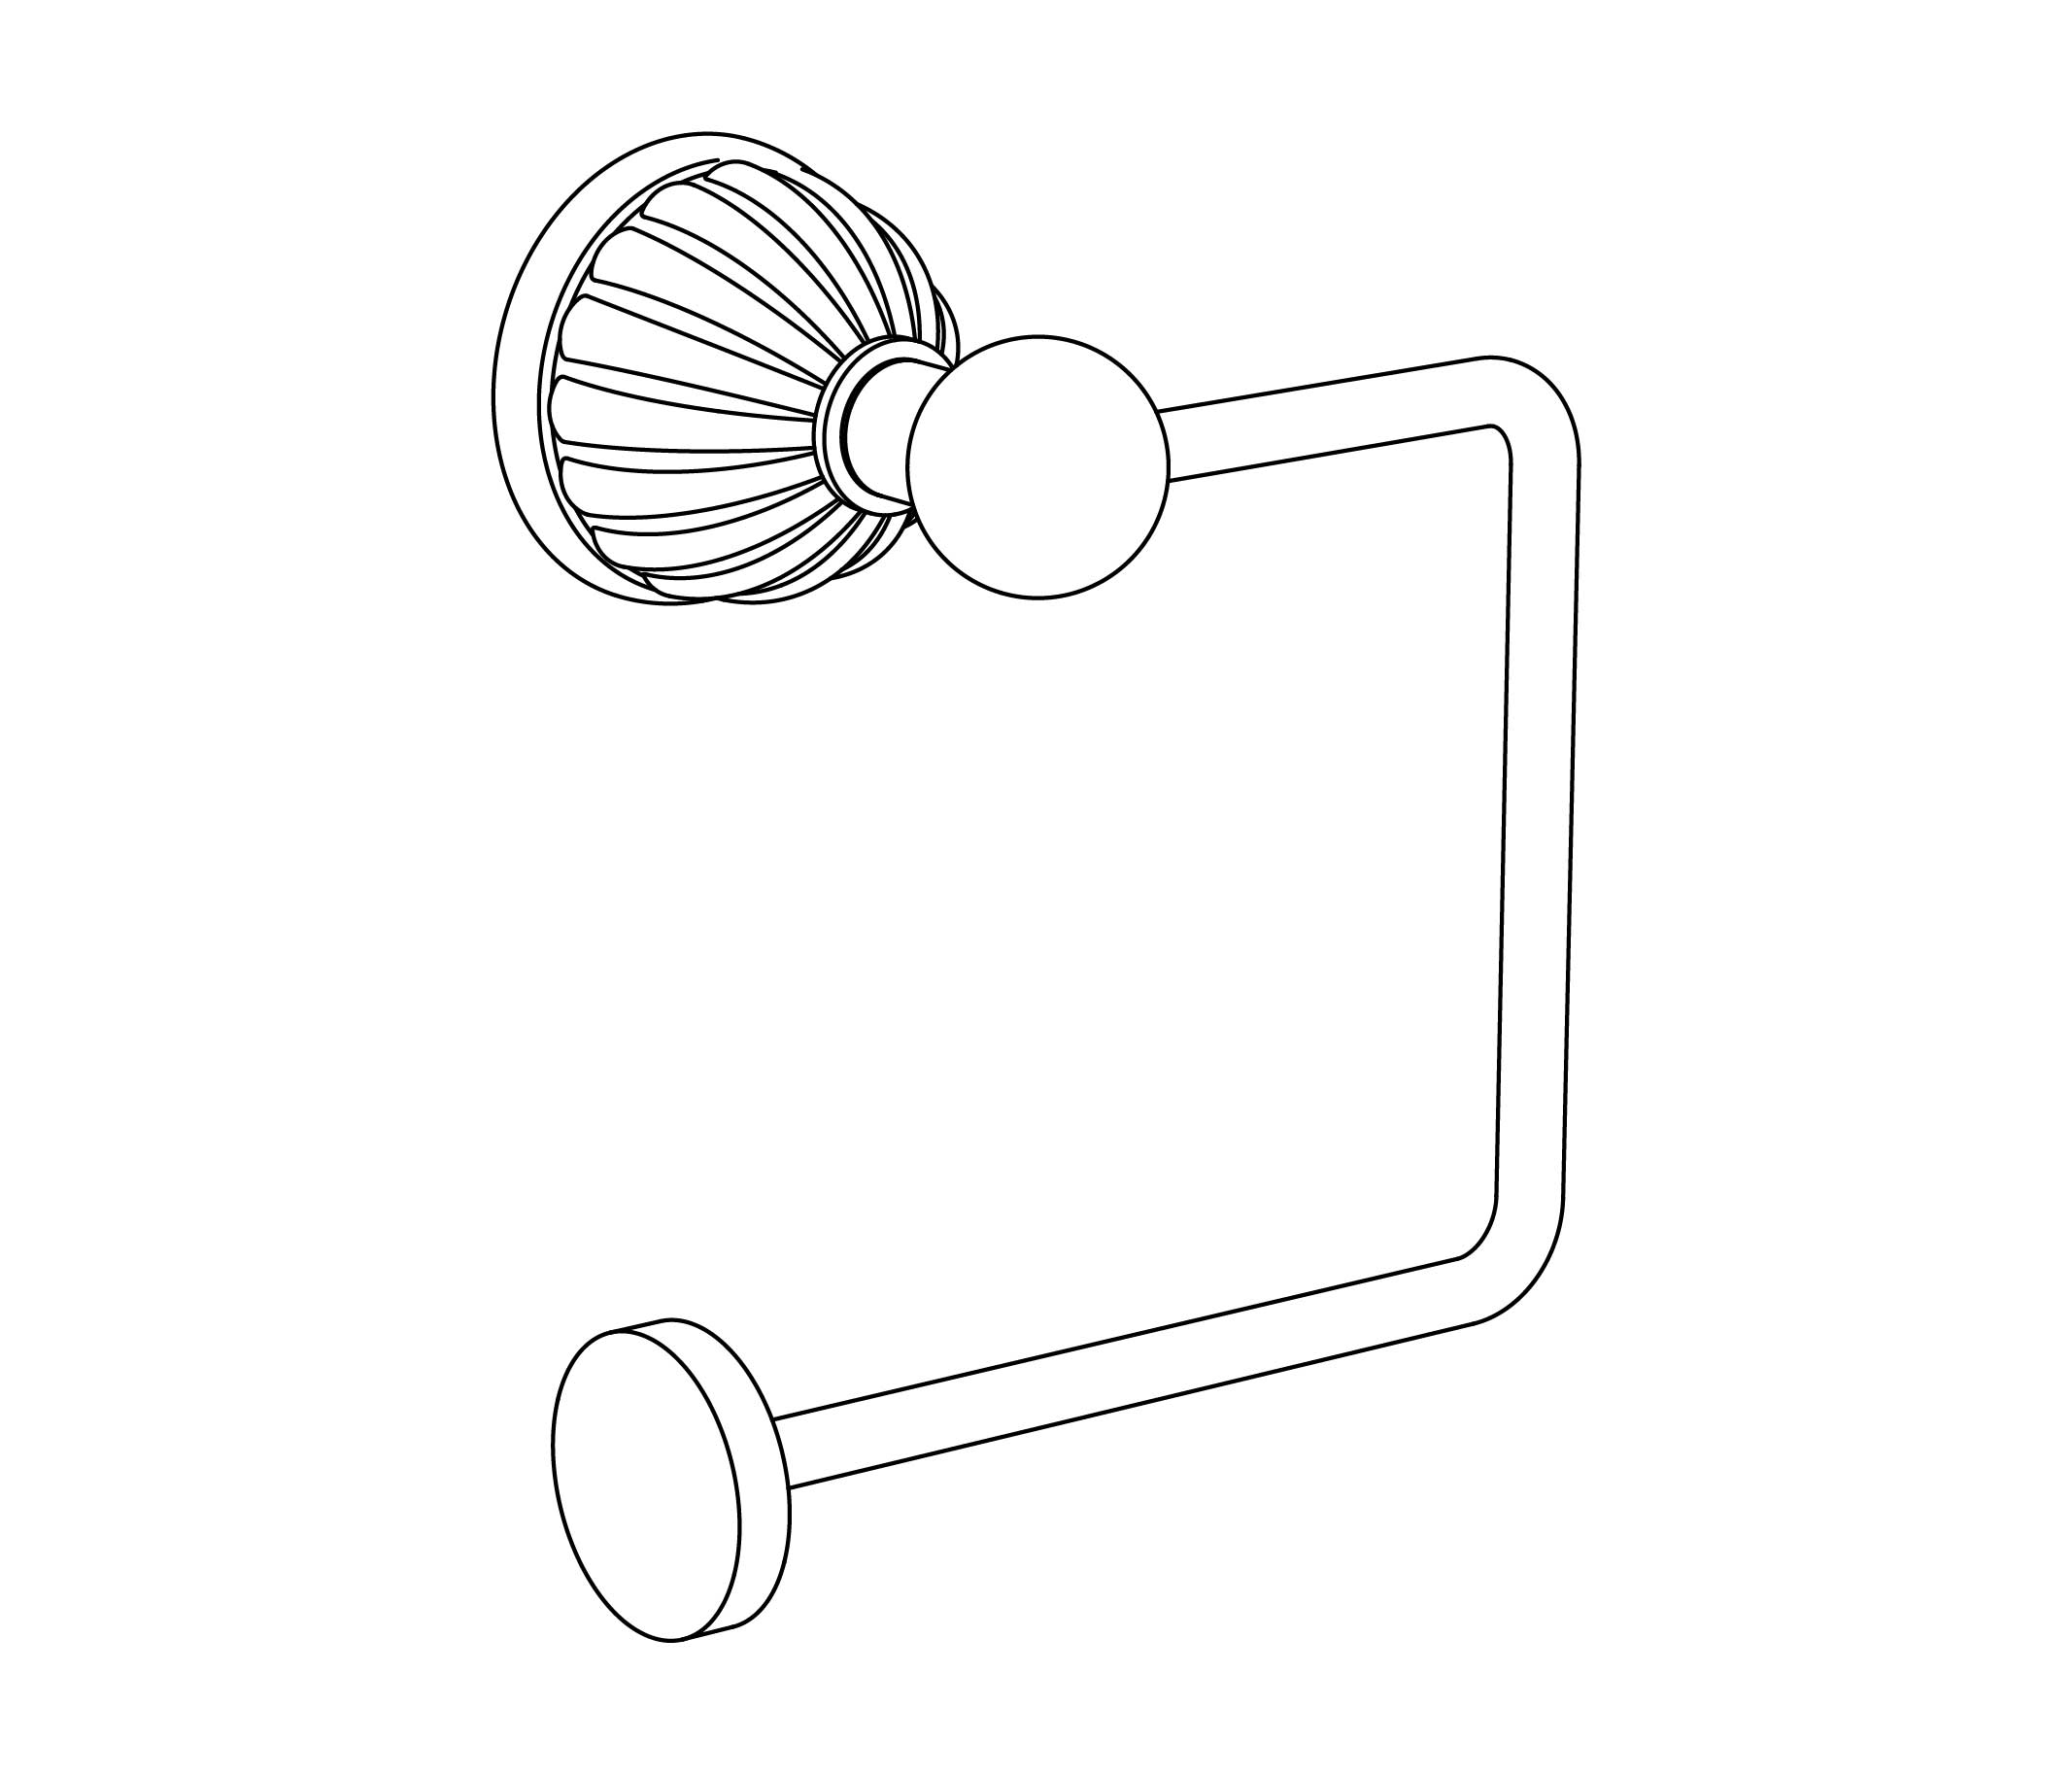 C71-504 Toilet roll holder without cover